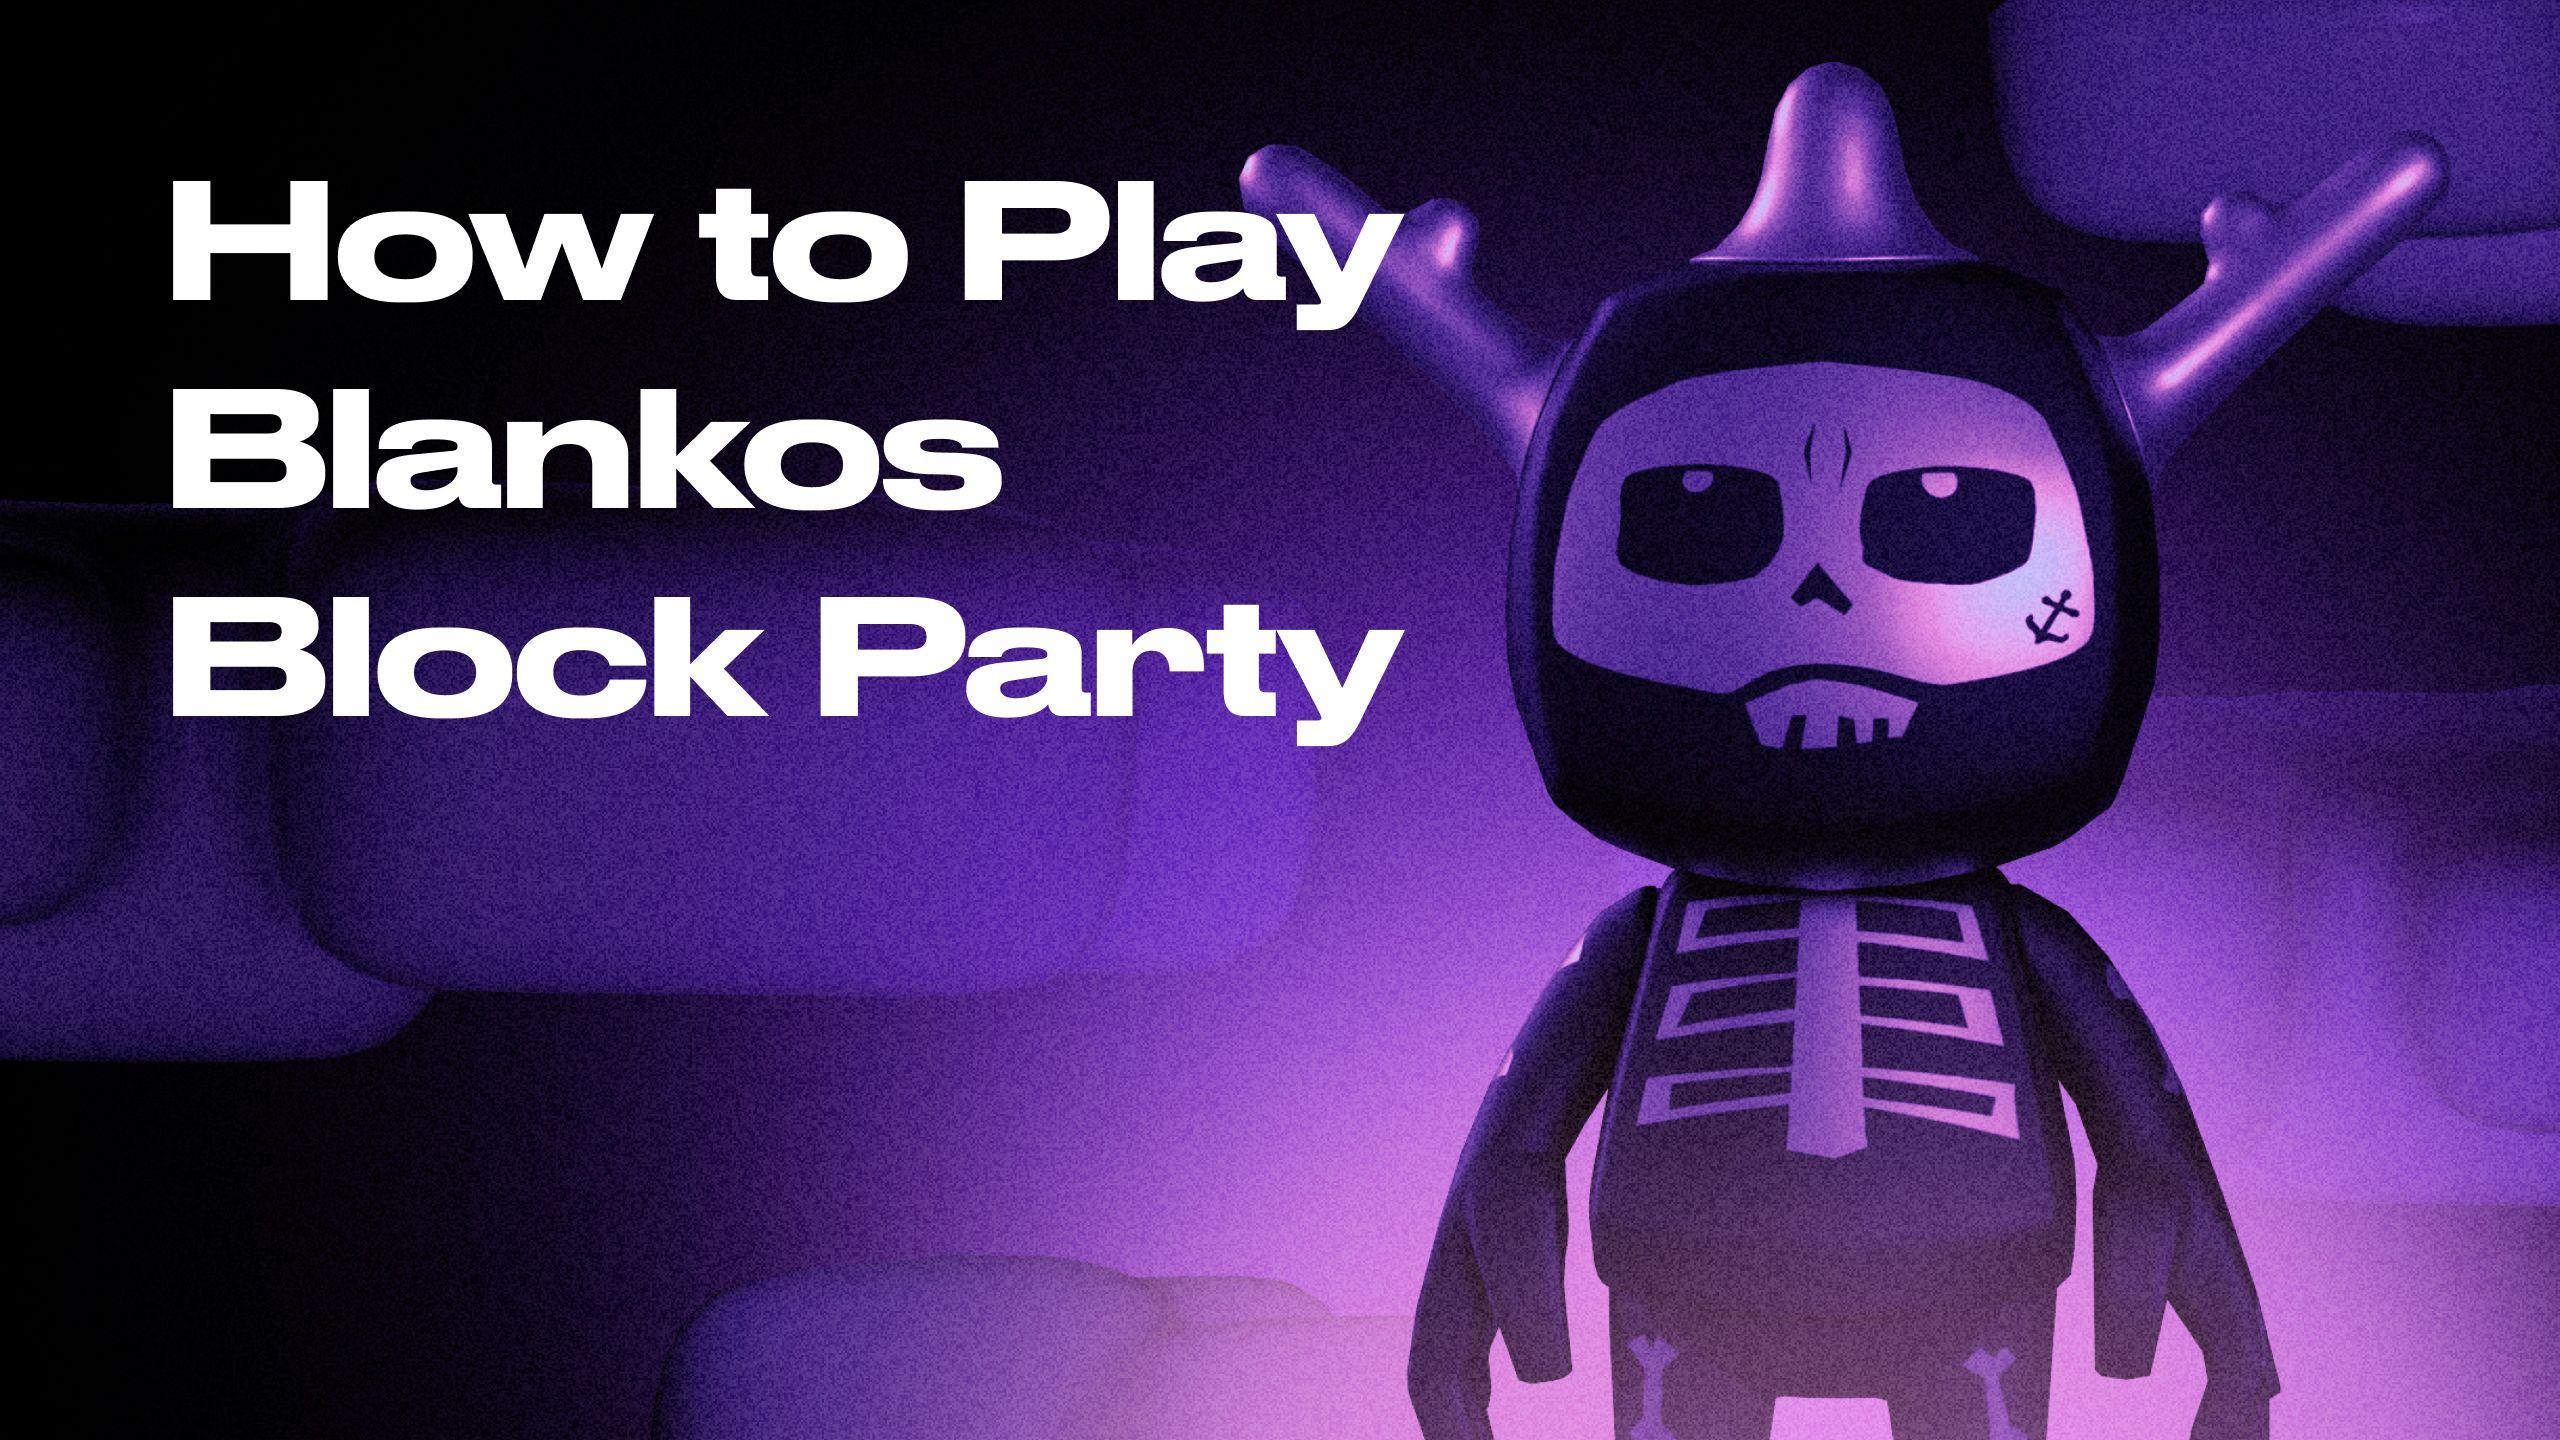 How to Play Blankos Block Party Guide